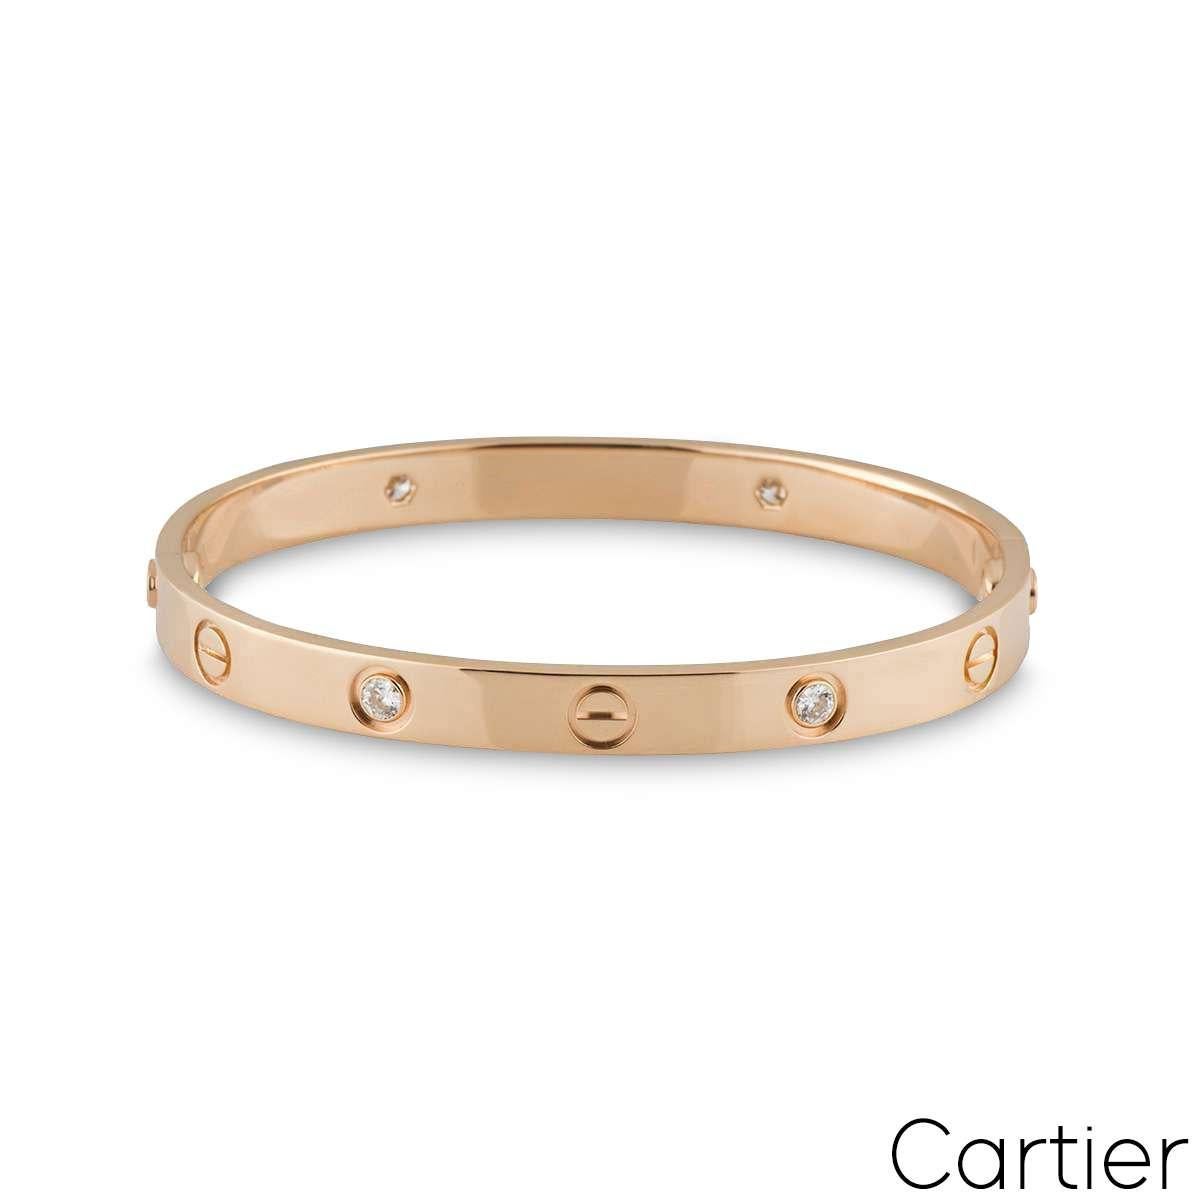 An 18k rose gold half diamond Cartier bracelet from the Love collection. The iconic screw motif alternates with 4 round brilliant cut diamonds on the outer edge of the bracelet totalling 0.42ct. The bracelet is a size 19 and features the new style